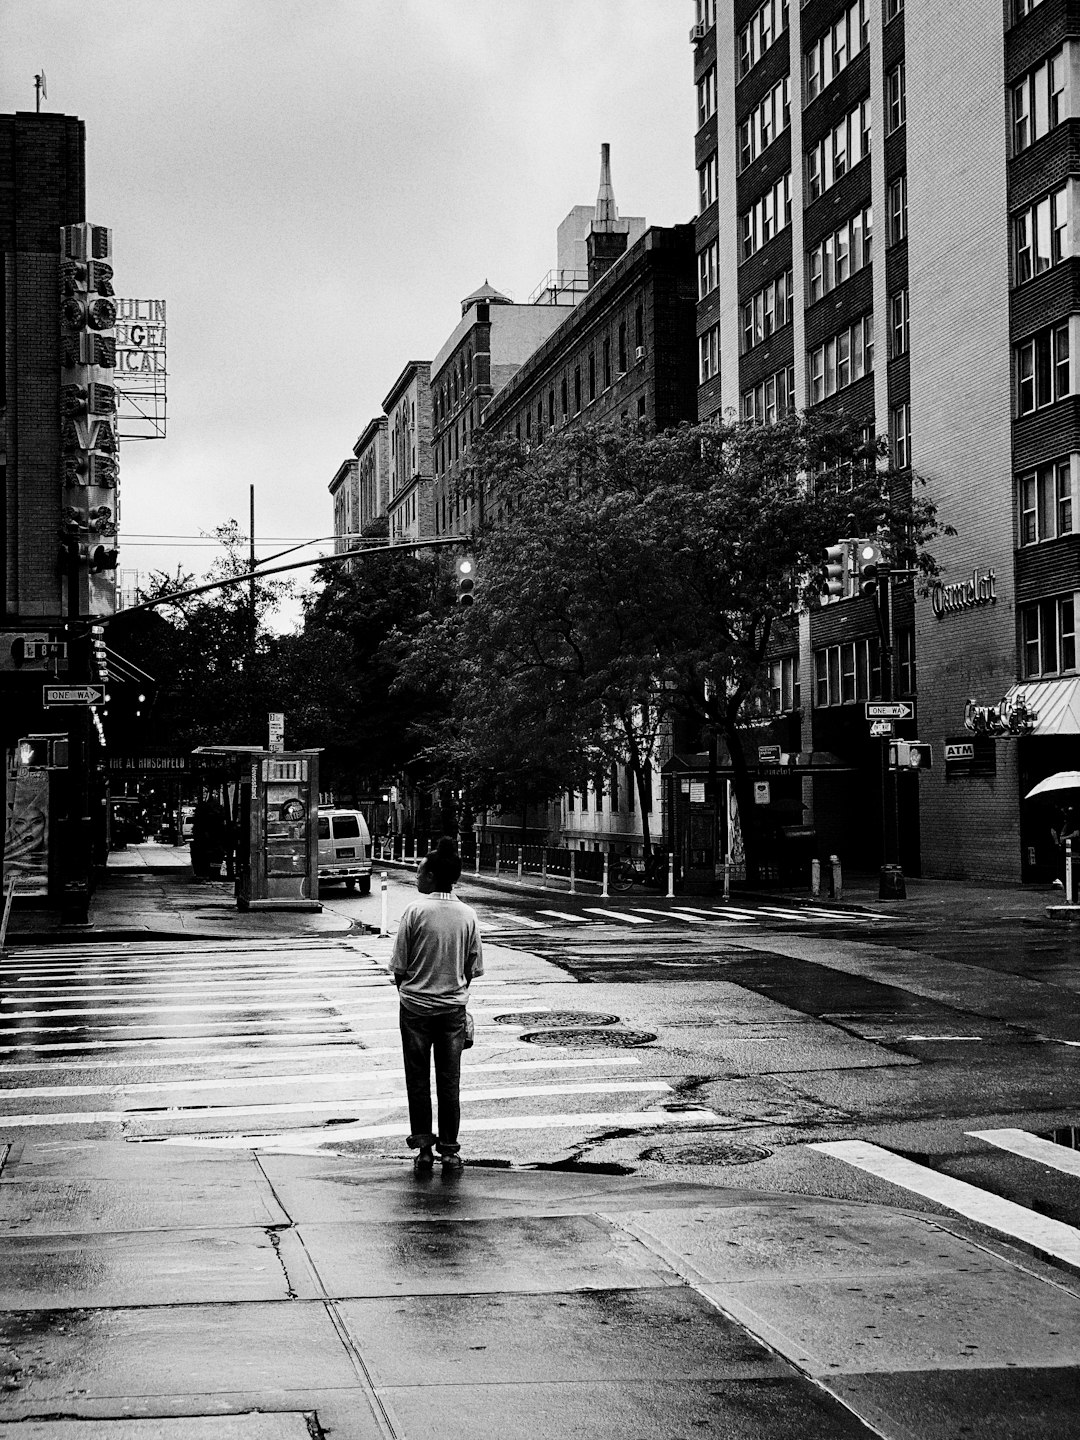 man in white shirt walking on street in grayscale photography